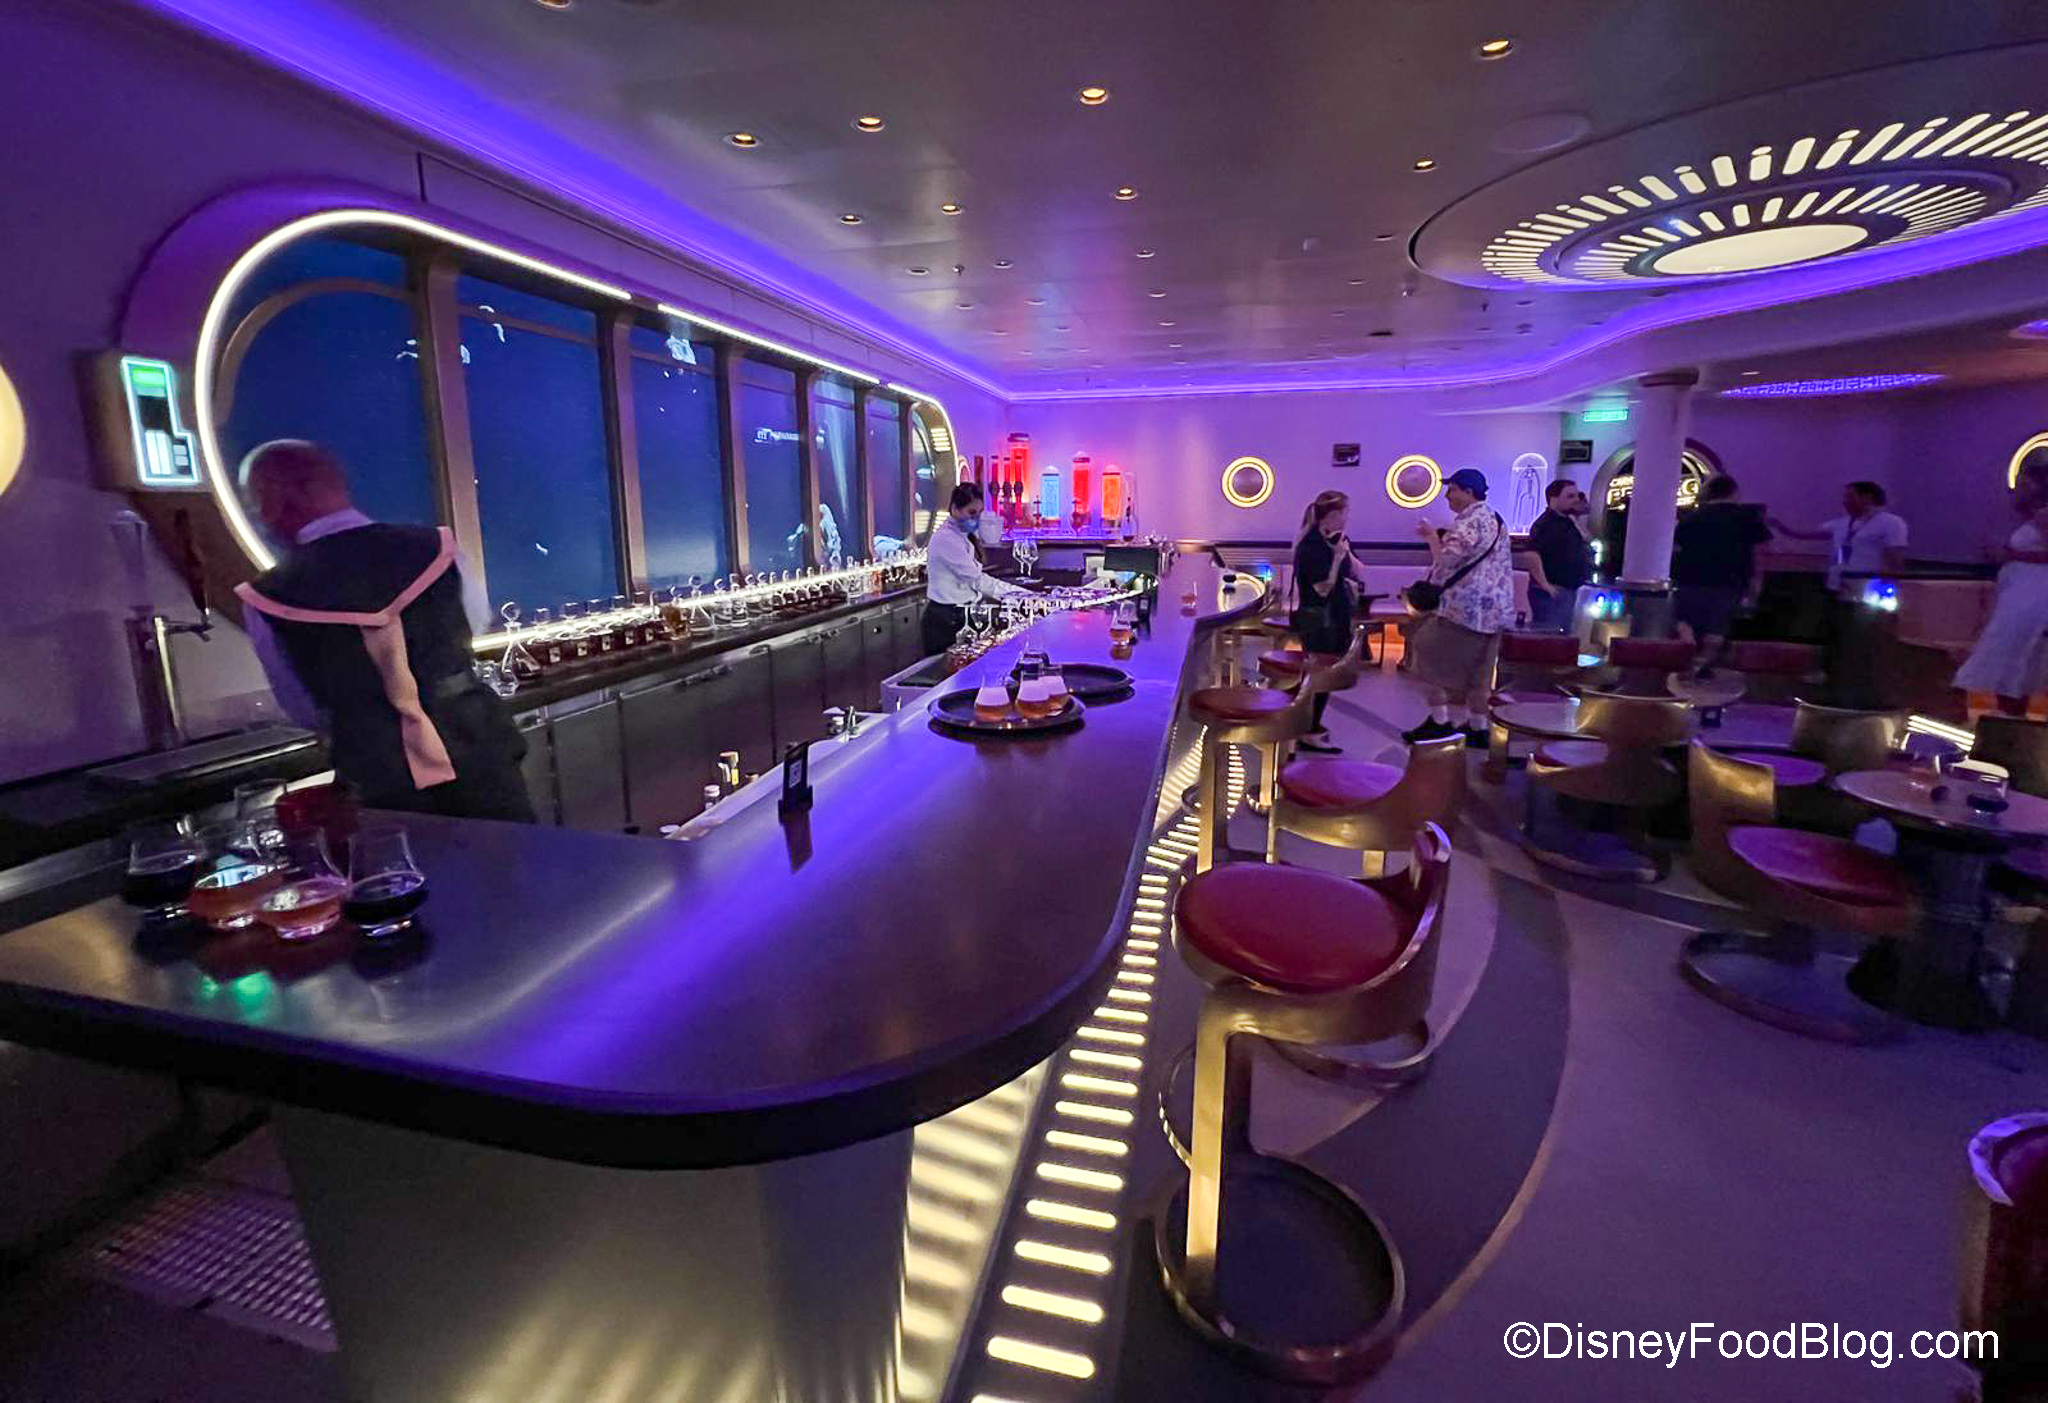 https://www.disneyfoodblog.com/wp-content/uploads/2022/06/2022-port-canaveral-disney-cruise-line-wish-ship-new-star-wars-hyperspace-lounge-atmo-2.jpg